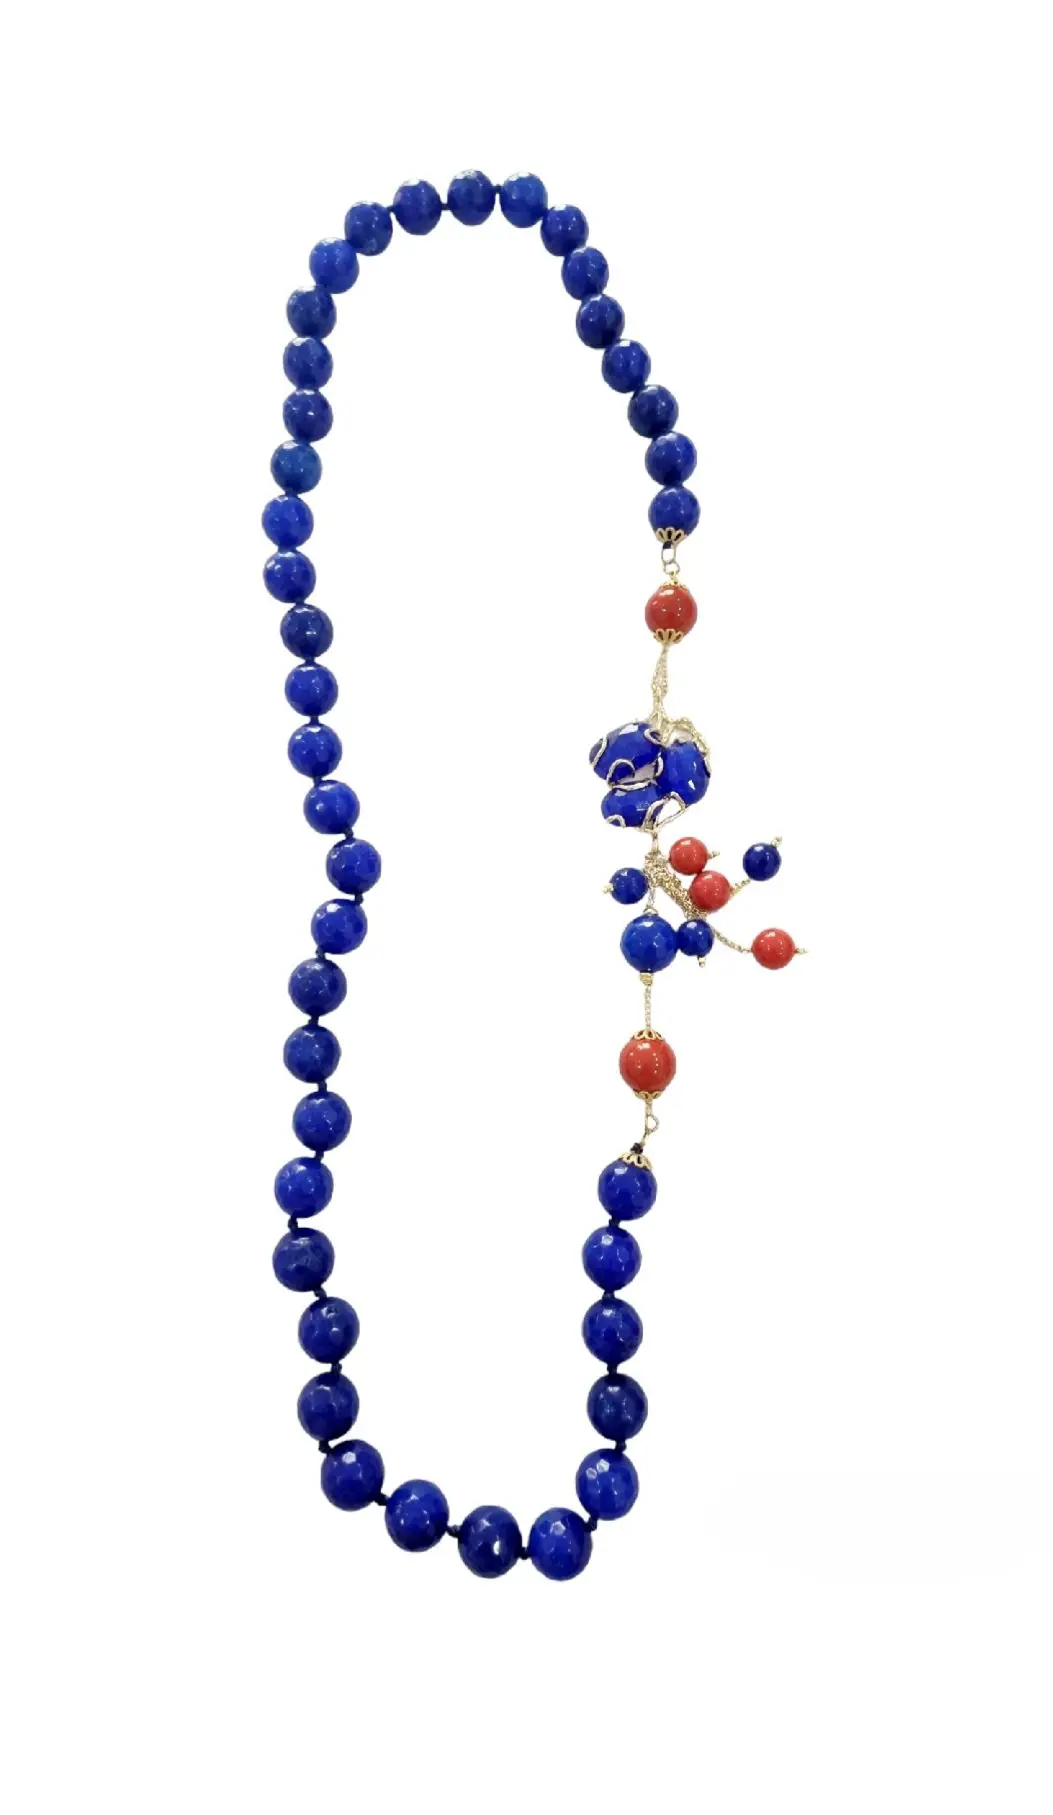 Necklace made with electric blue agate and coral paste, with cat's eye on the side mounted on brass. Length 78cm